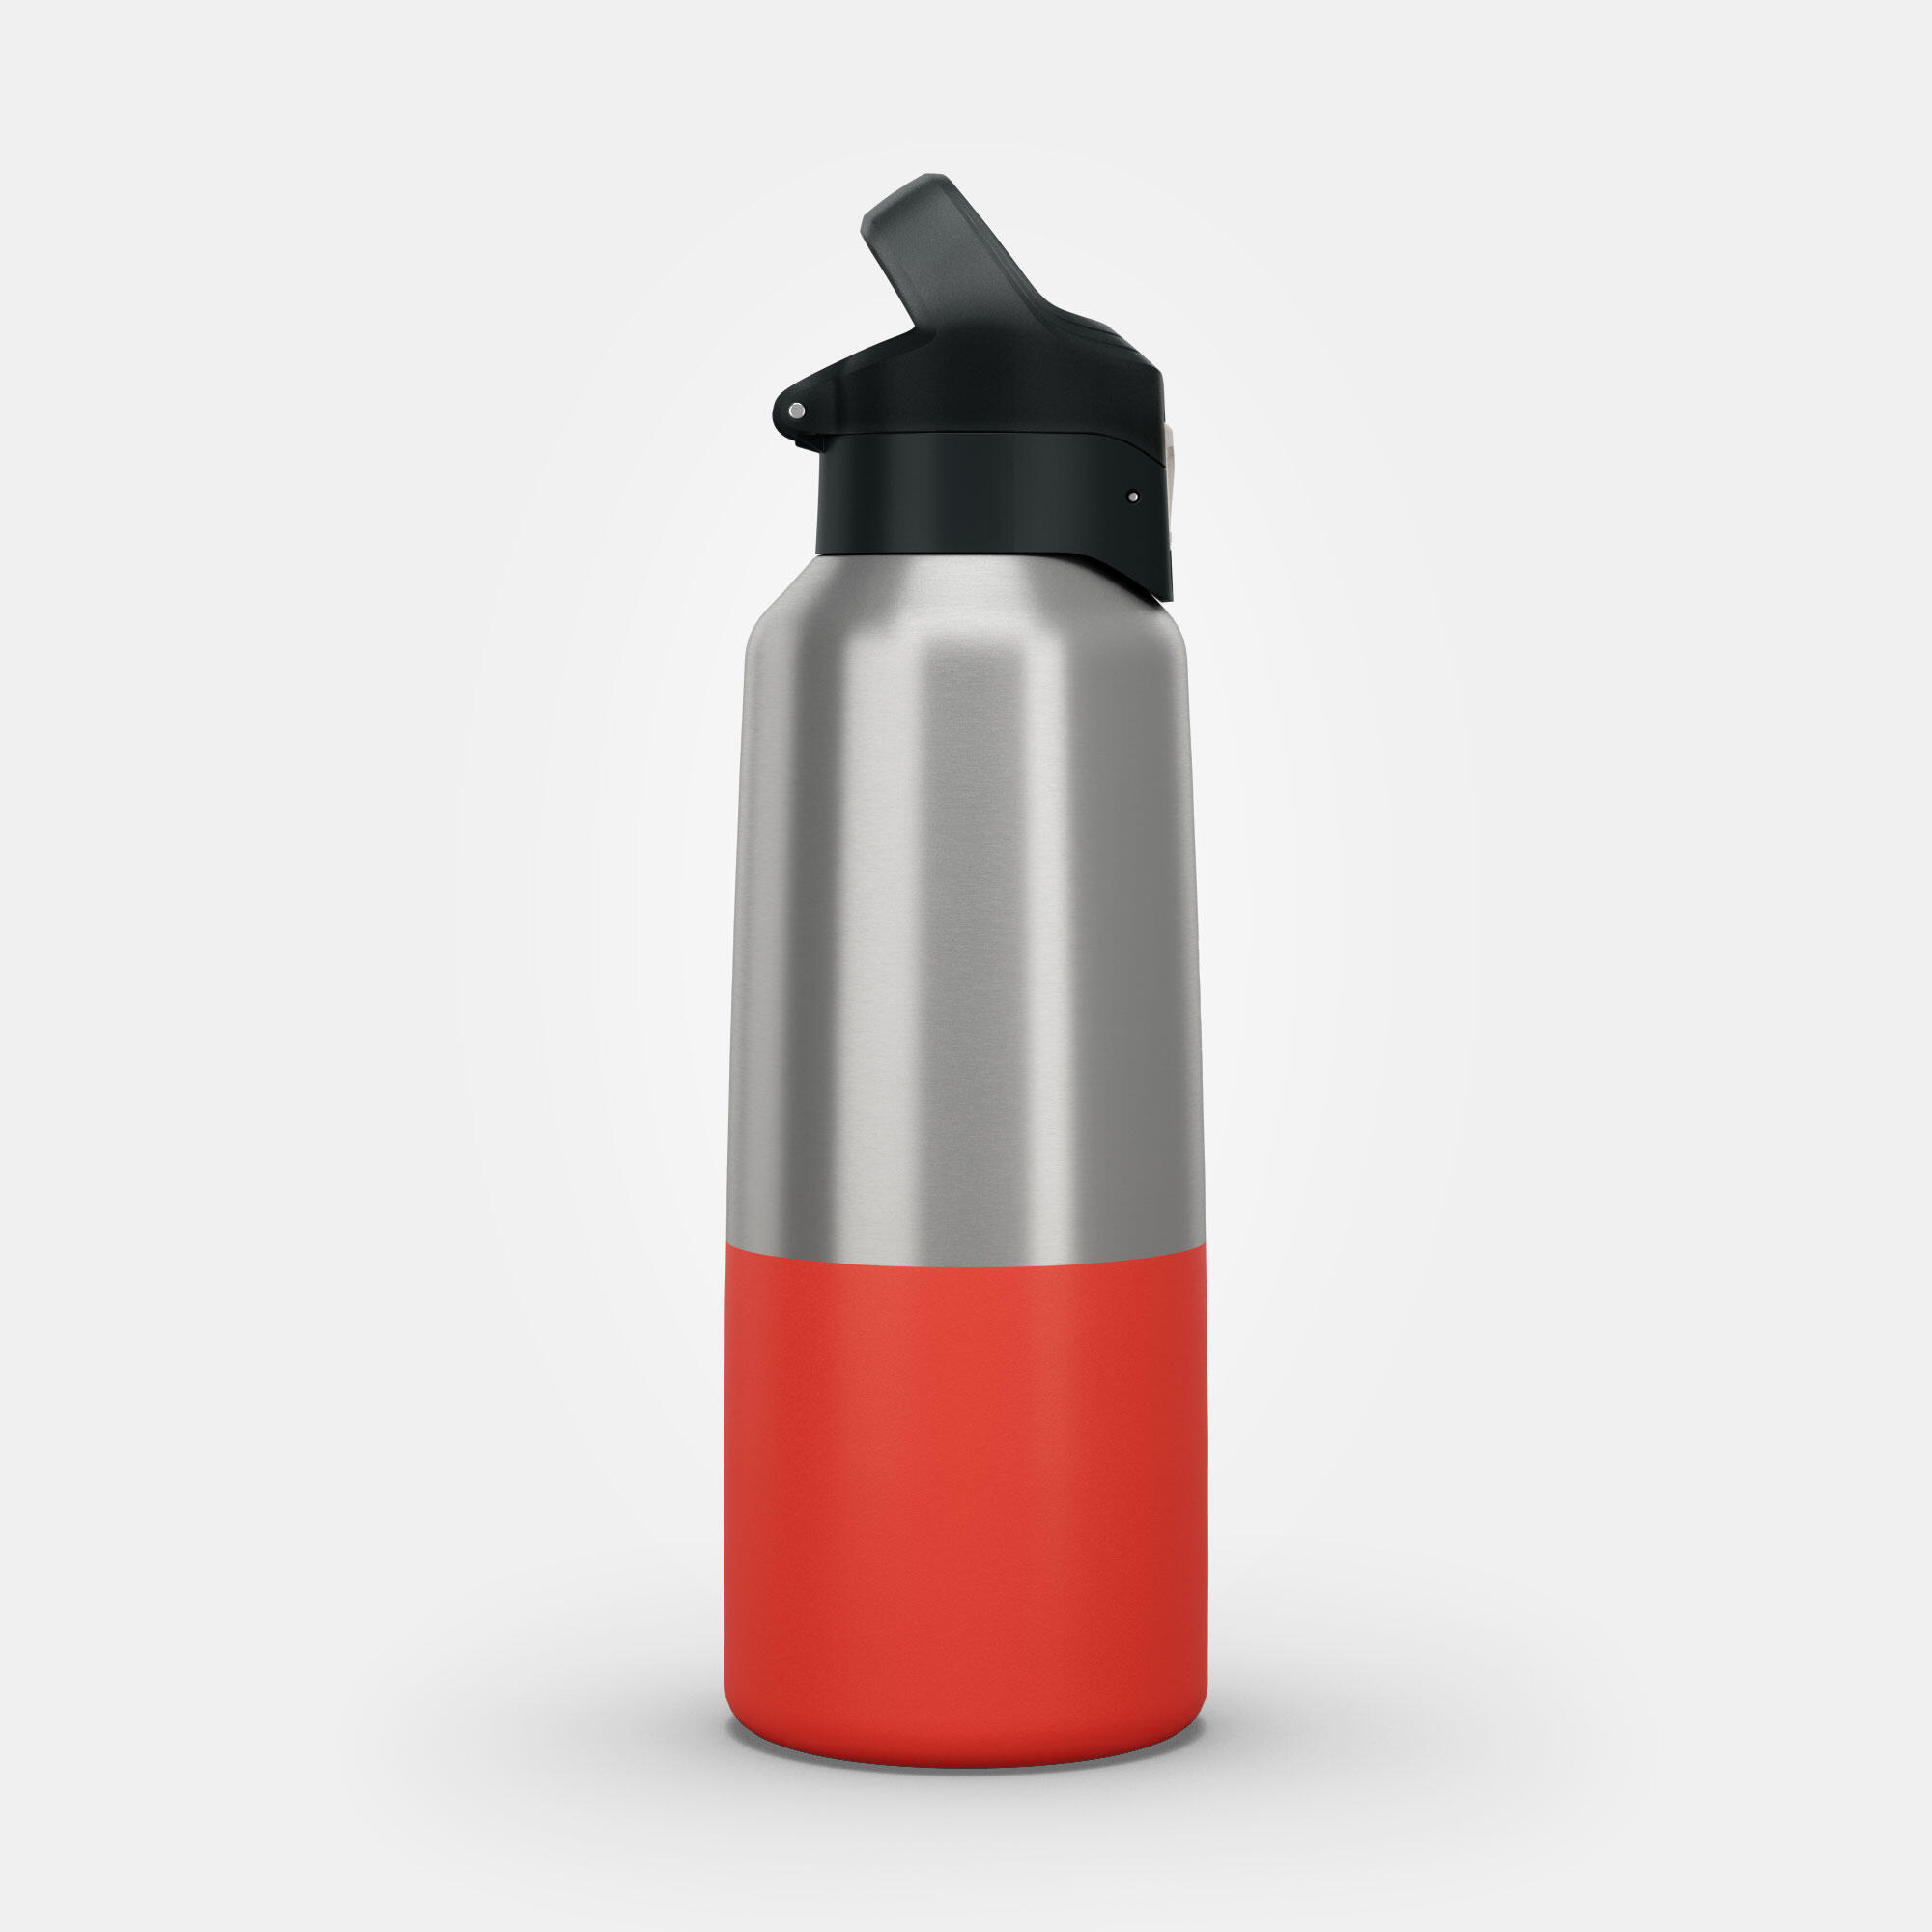 0.8 L stainless steel water bottle with quick-open cap for hiking - Red 11/35